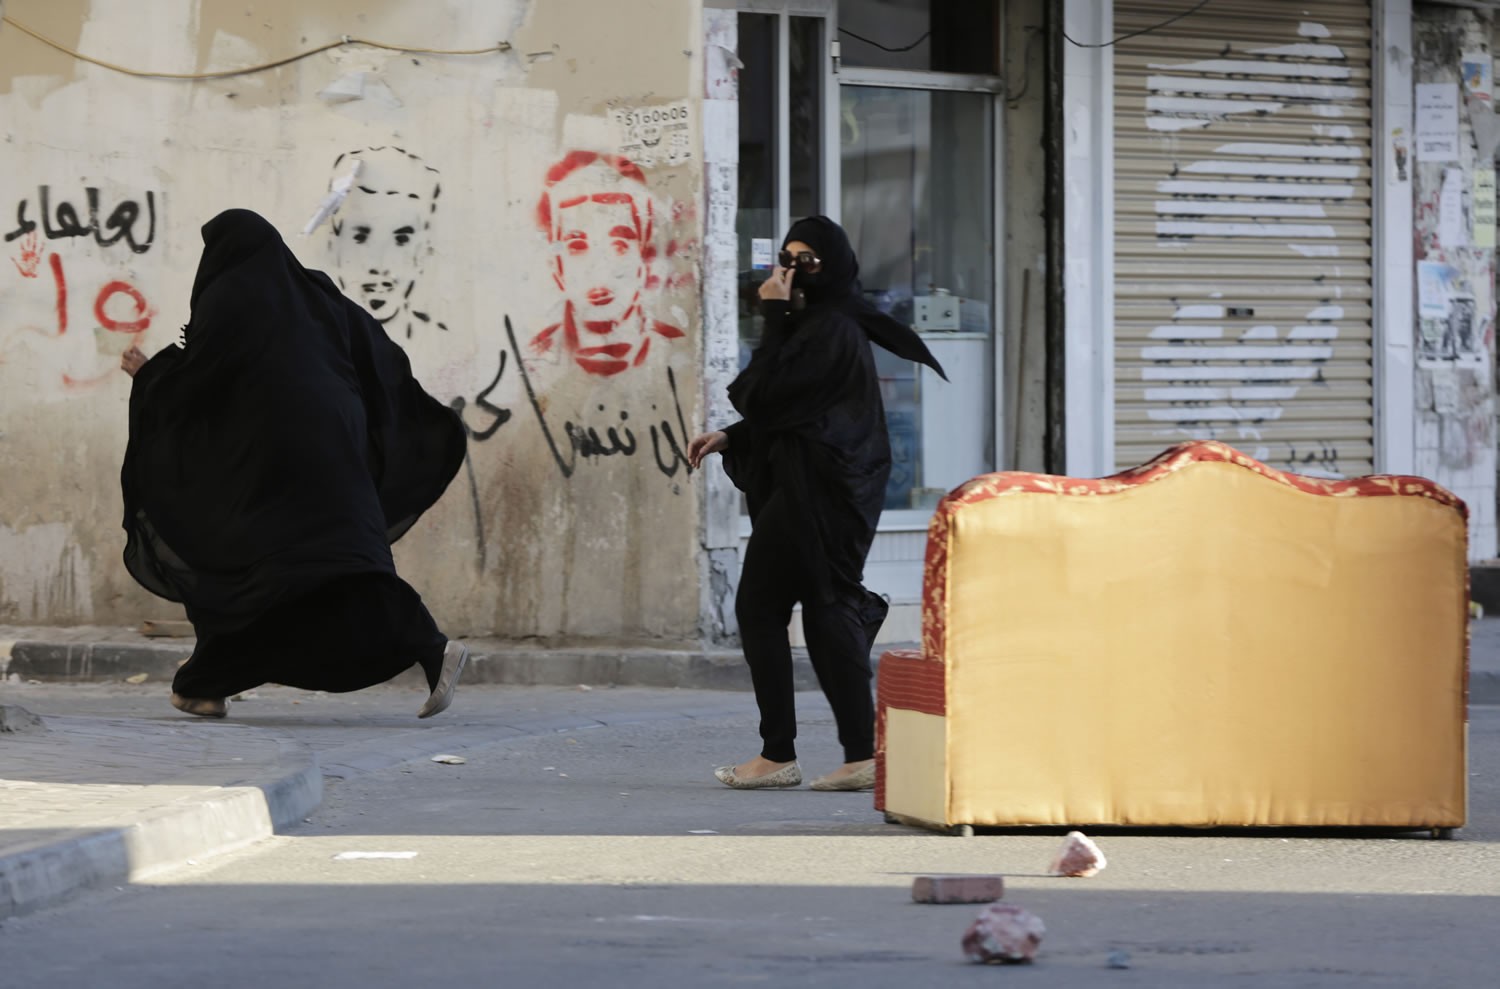 Bahraini women run from approaching riot police who were chasing protesters against Saudi Arabia&#039;s execution of Shiite cleric Sheikh Nimr al-Nimr in Daih, Bahrain, a largely Shiite suburb of the capital Monday. Graffiti on the wall reads, &quot;we will not forget you,&quot; beneath pictures of people killed in previous unrest. Allies of Saudi Arabia, including the monarchy in neighboring Bahrain, began scaling down their diplomatic ties to Iran in the wake of the ransacking of Saudi diplomatic missions in Iran that followed al-Nimr&#039;s execution.